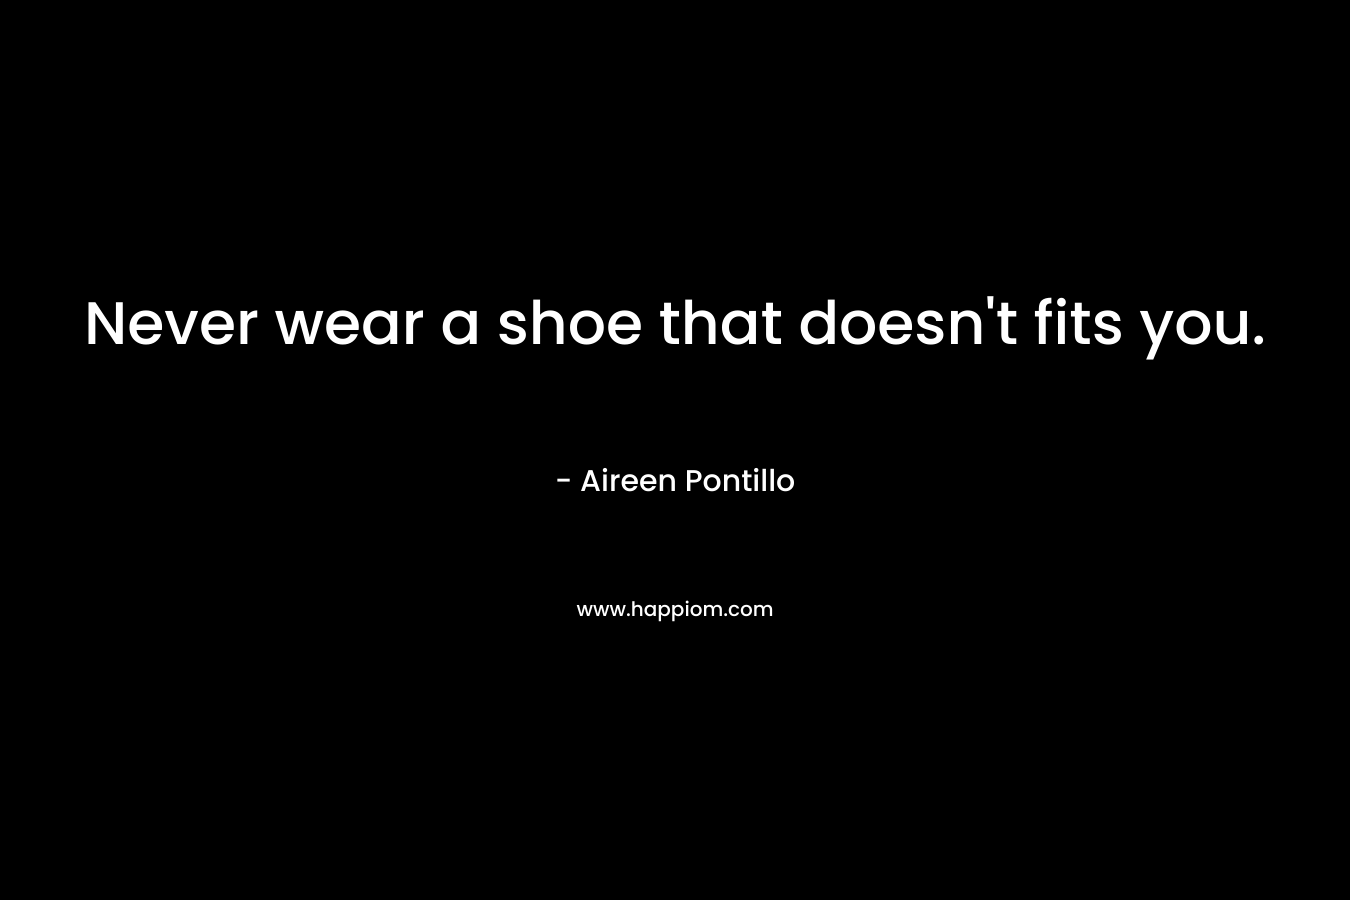 Never wear a shoe that doesn’t fits you. – Aireen Pontillo